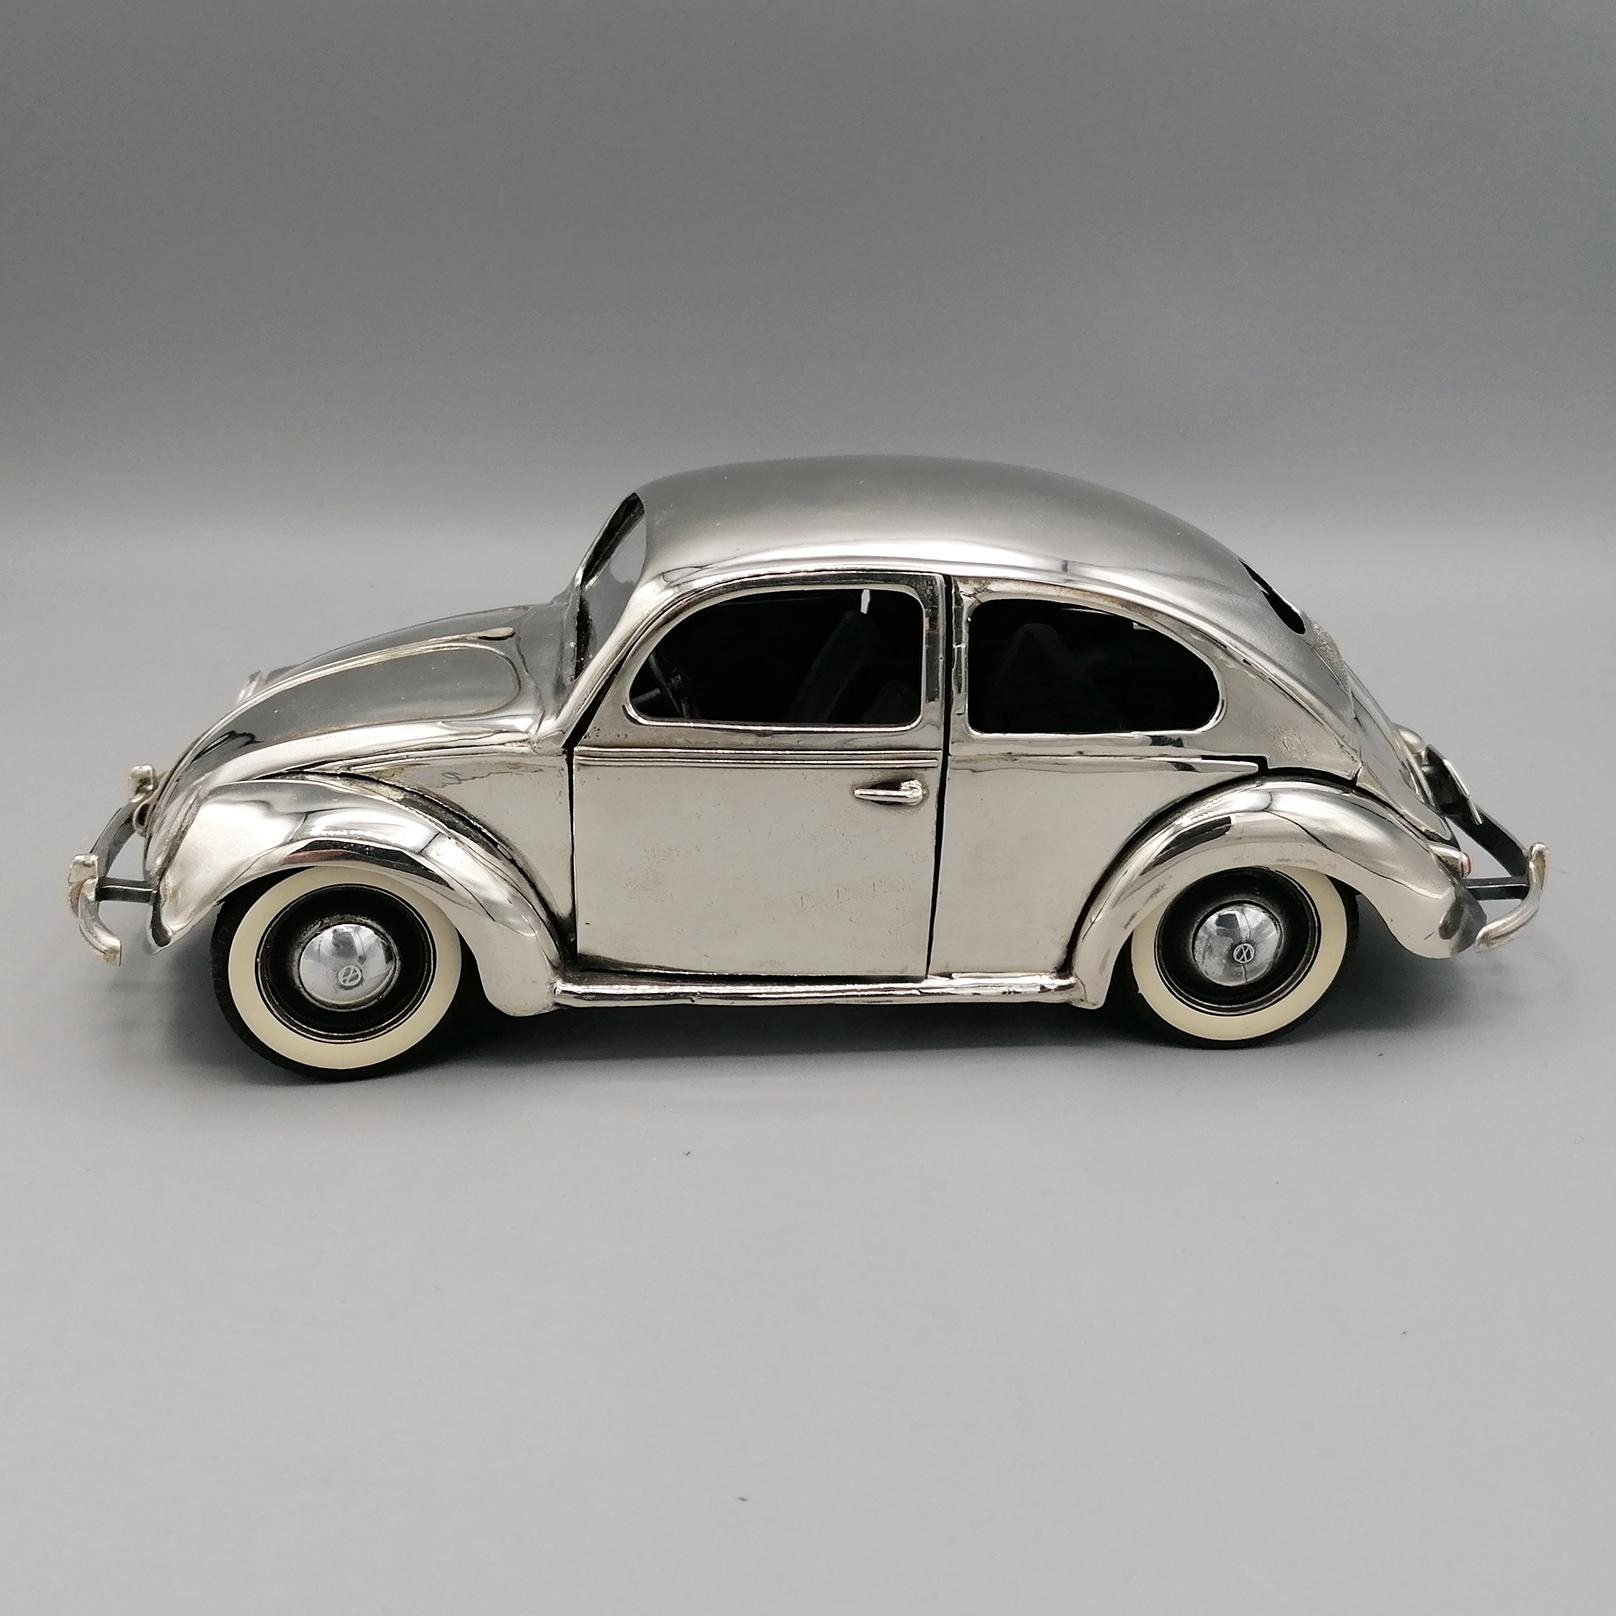 20th century Italian sterling silver volkswagen beetle typ1 model car 1945 circa.
Volkswagen Beetle model car in sterling silver.
The bodywork of the beetle is cast and filed and polished by hand to make the surface shiny.
The car doors open and the